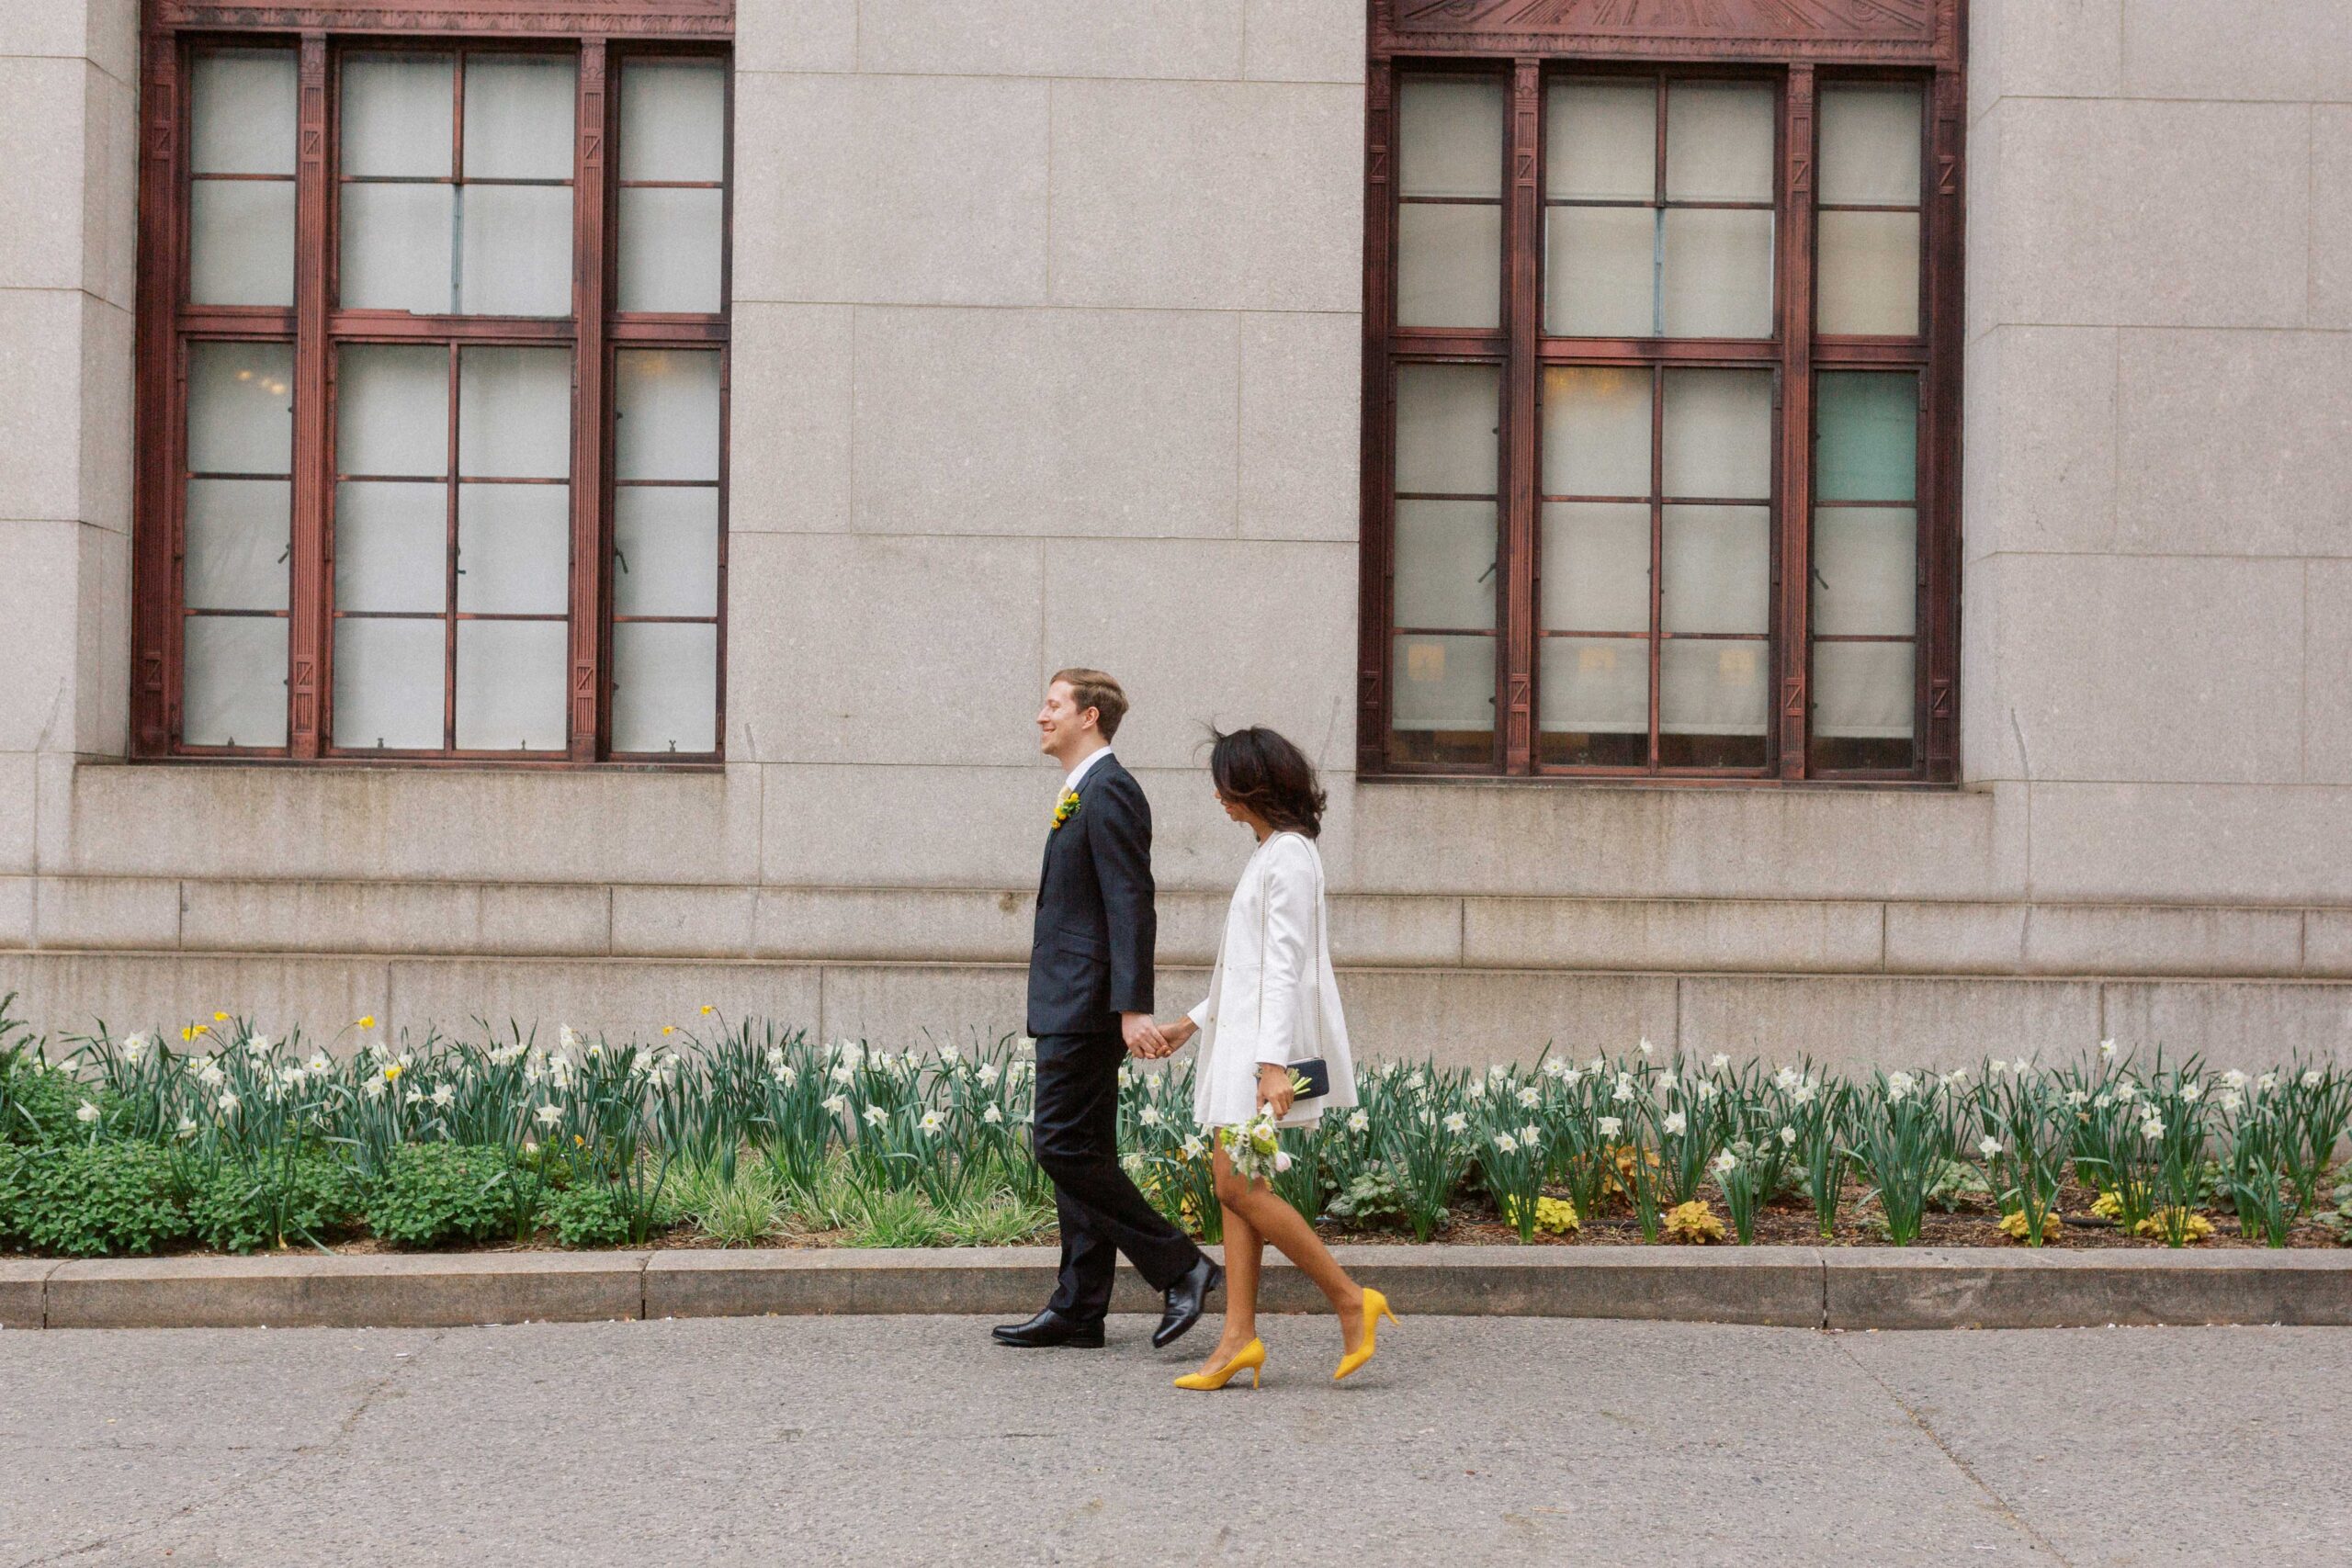 nyc city hall wedding photographer elopement couple outside of nyc marriage bureau in manhattan walking along garden of yellow daffodils